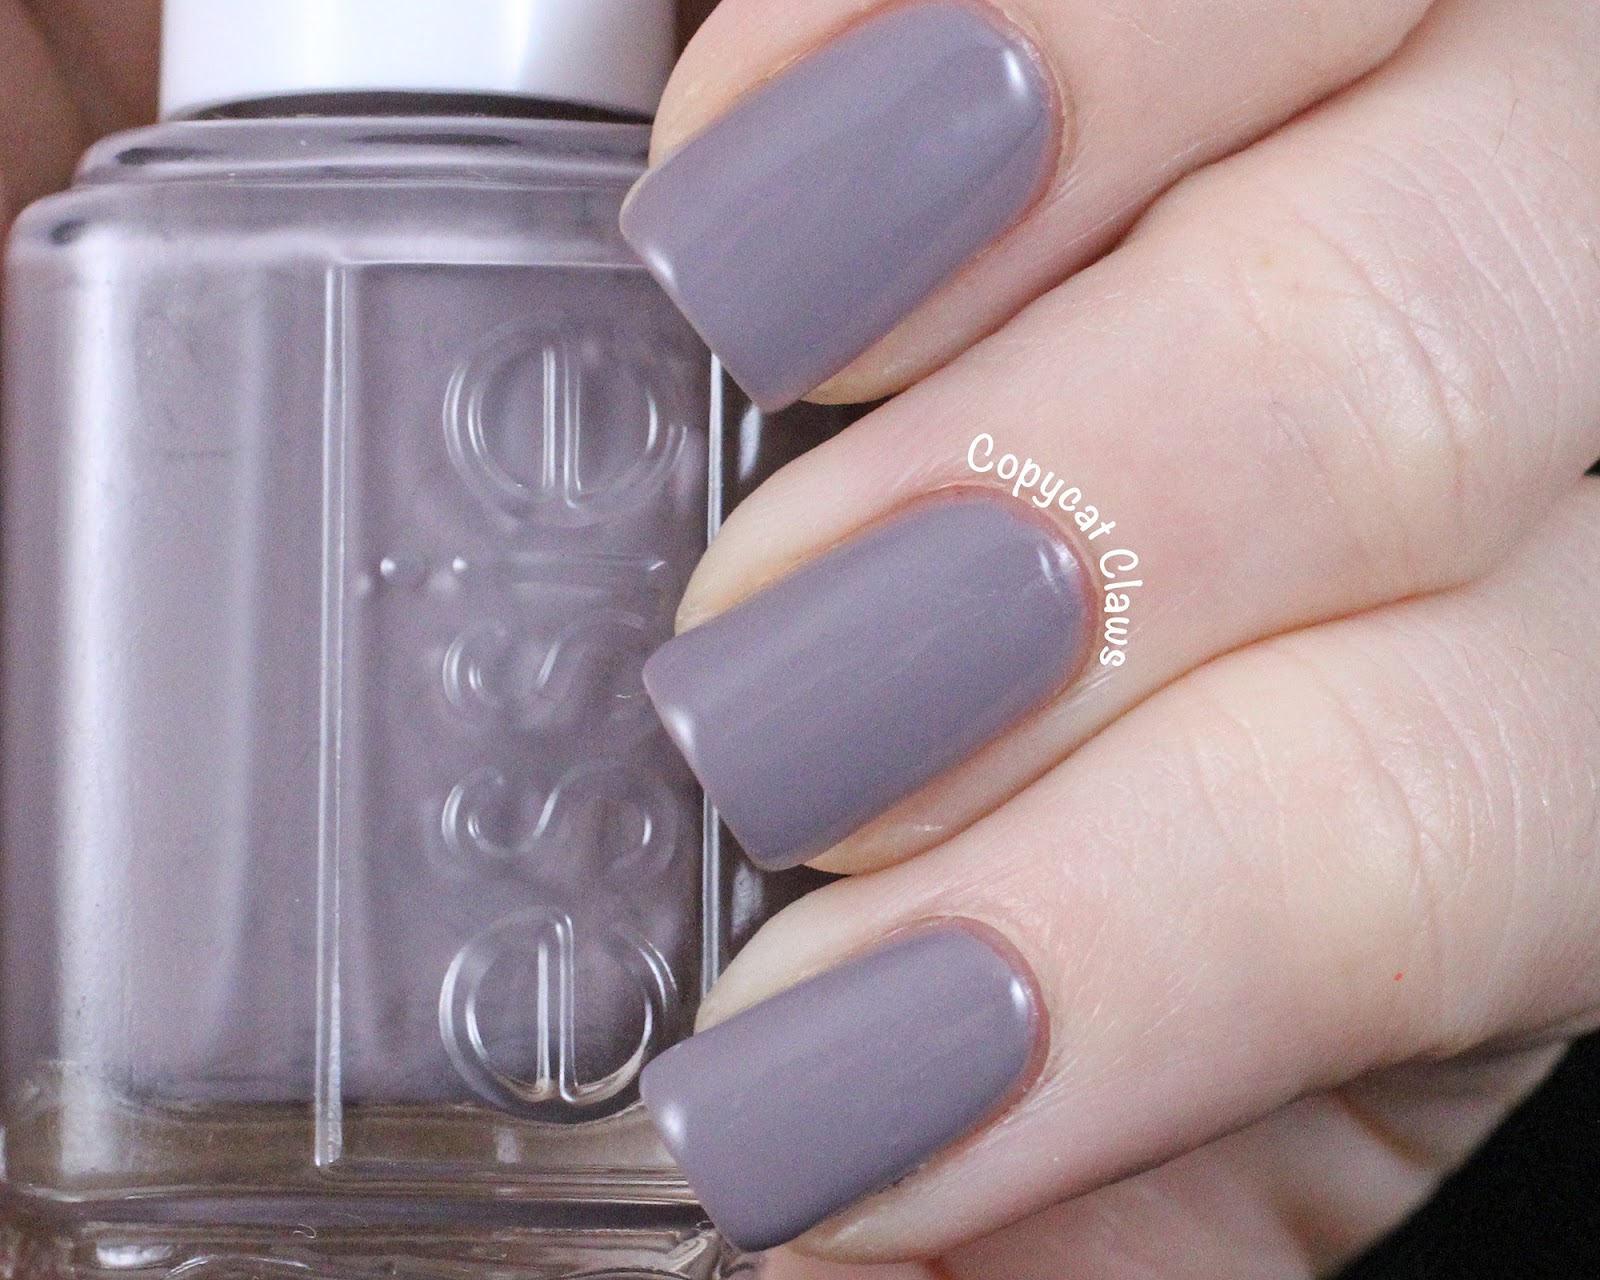 1. Essie Nail Polish in "Chinchilly" - wide 2